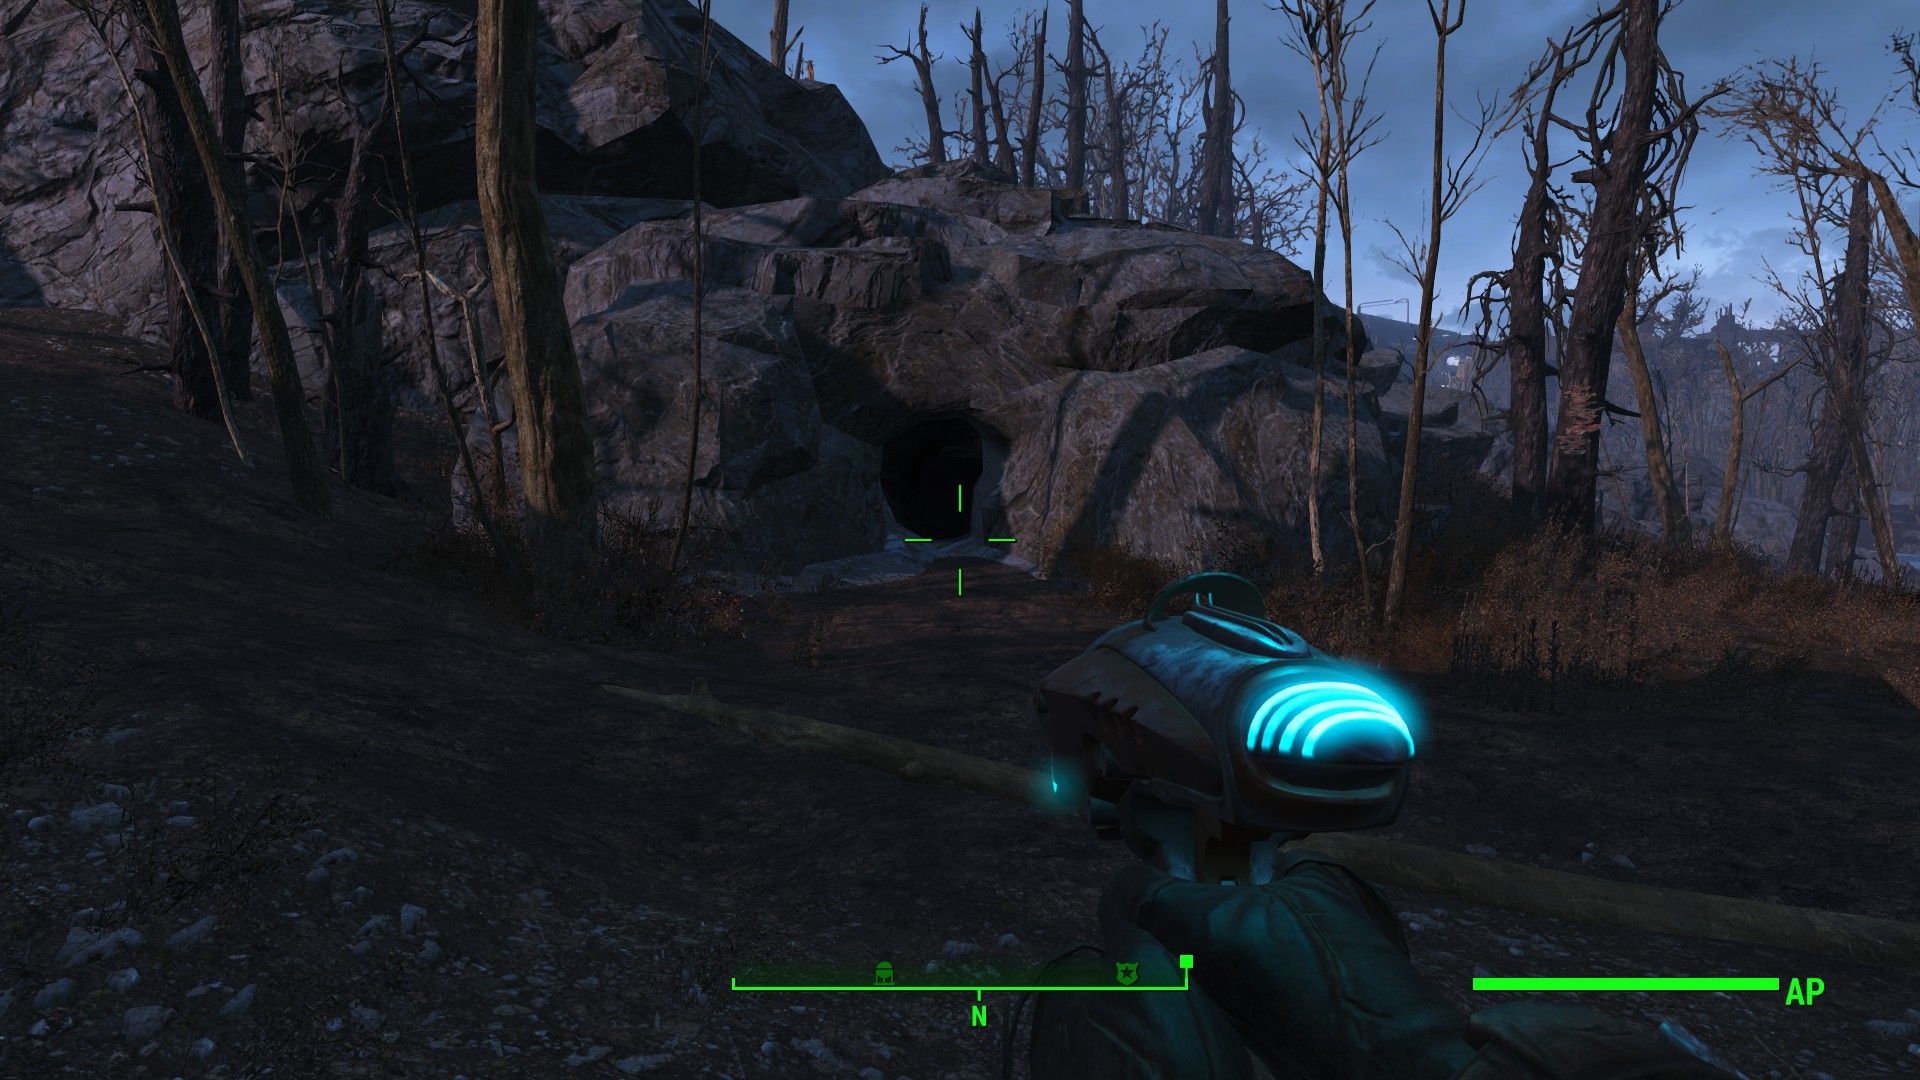 Unmarked cave containing the Alien Blaster Pistol in Fallout 4